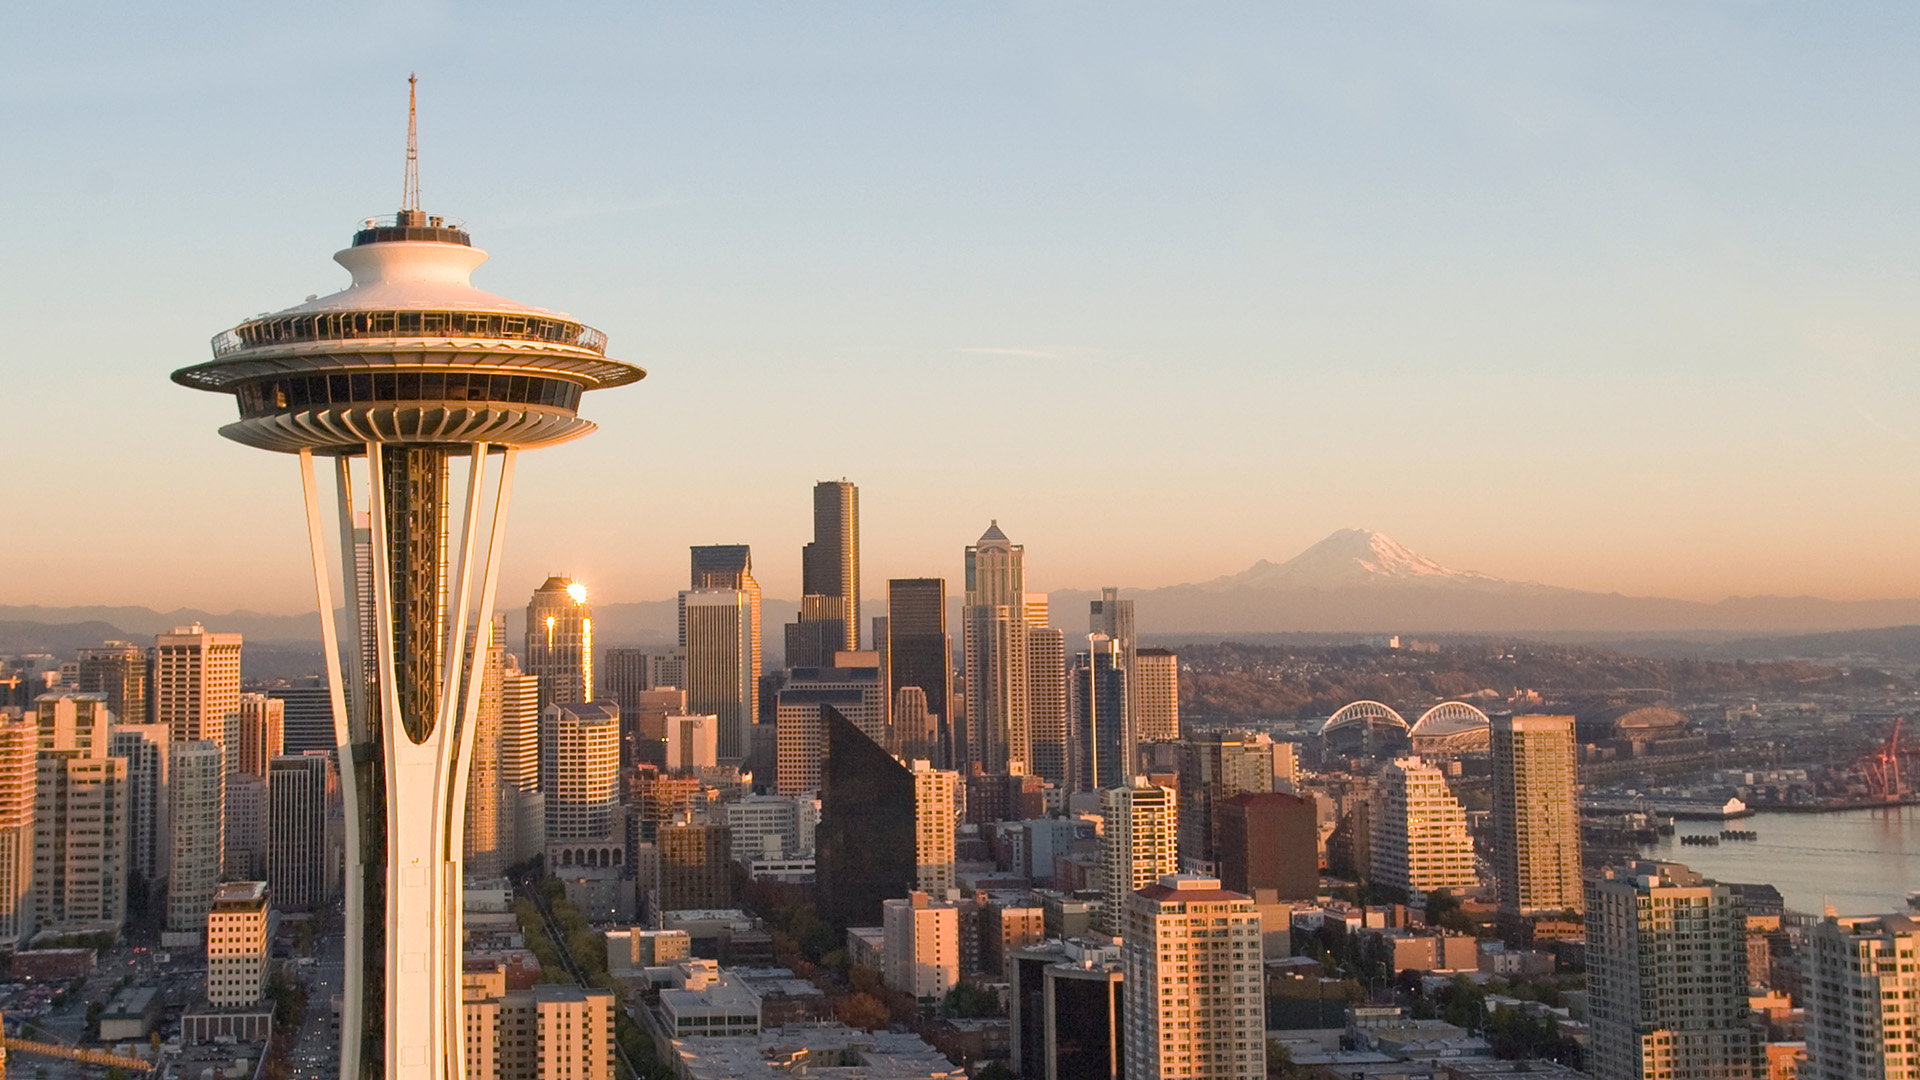 Seattle skyline, space needle and mountains at sunset